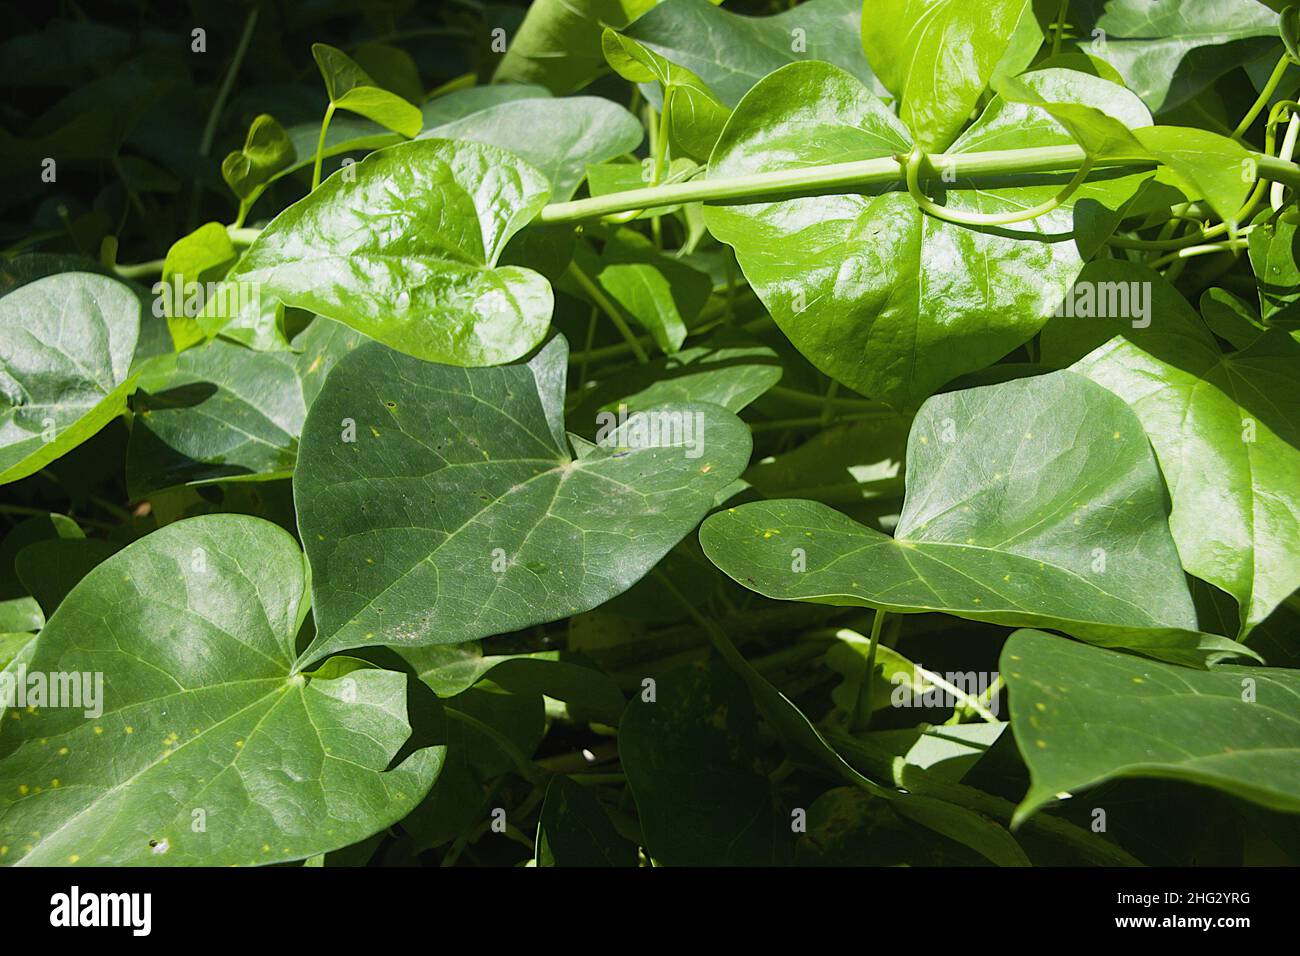 View of green leaves of amrutha balli or giloy or Indian Tino sora or Heart-Leaved Tinospora or Guduchi medicinal plant Stock Photo